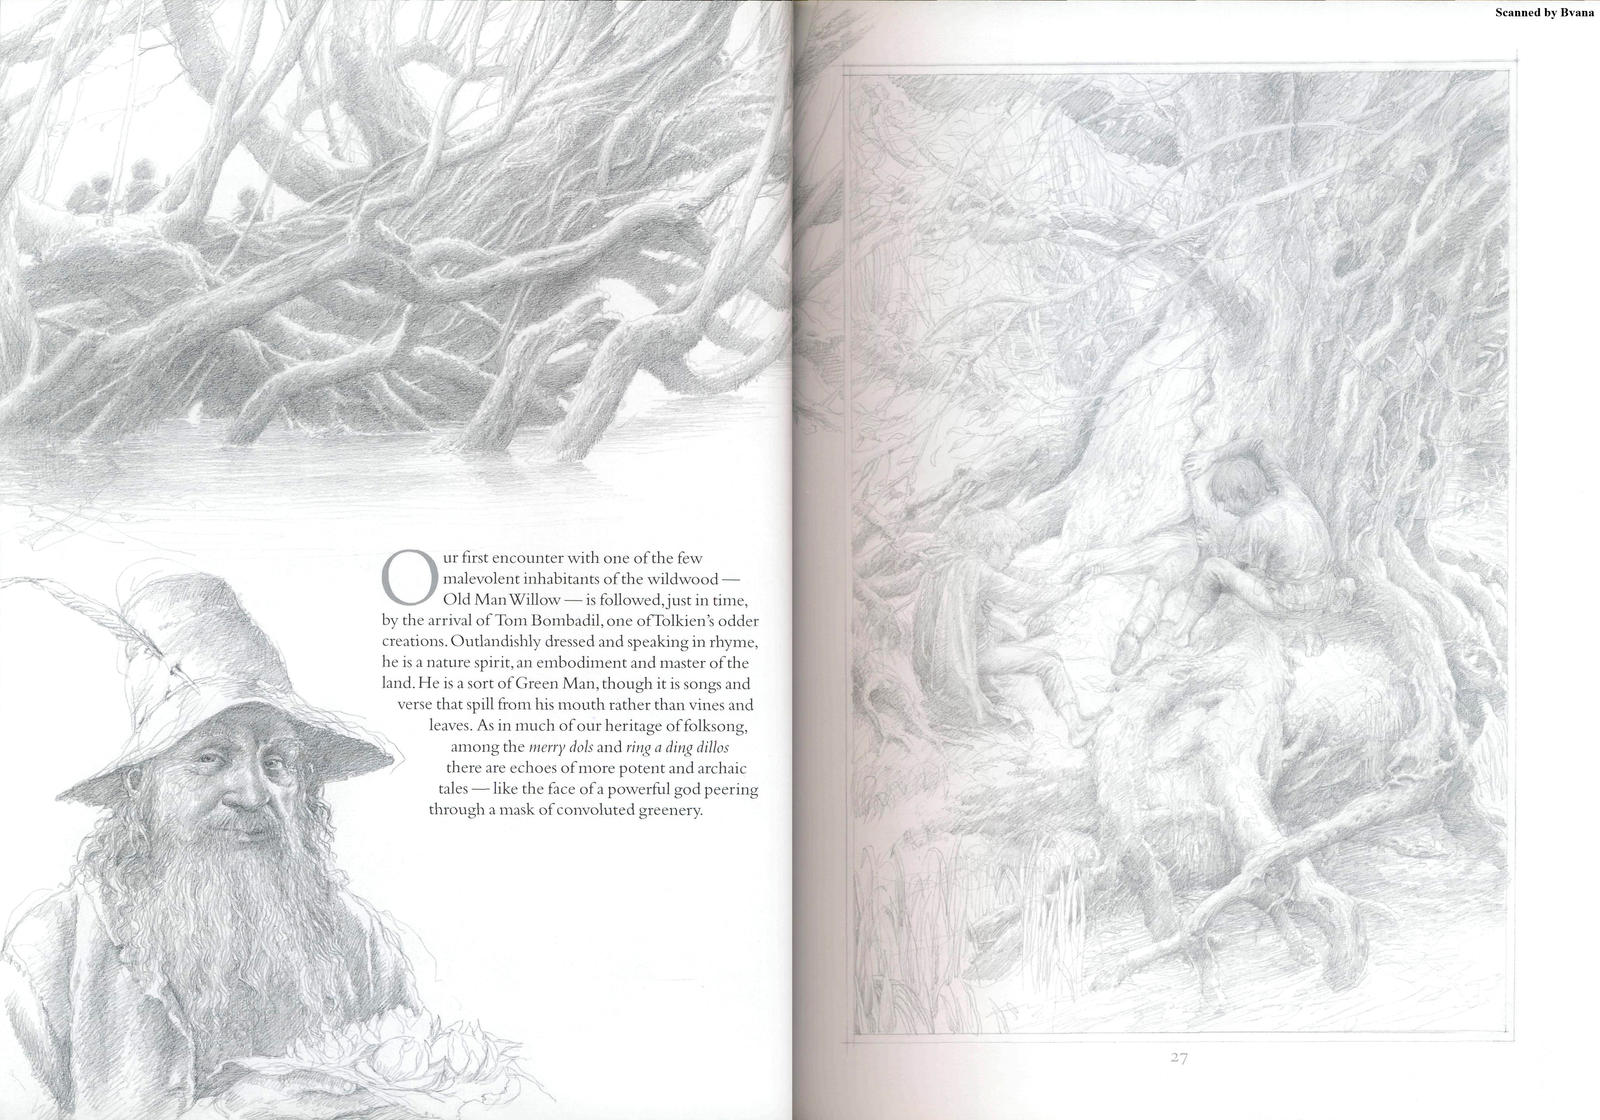 The Lord Of The Rings Sketch Book-Alan Lee by f17er on DeviantArt